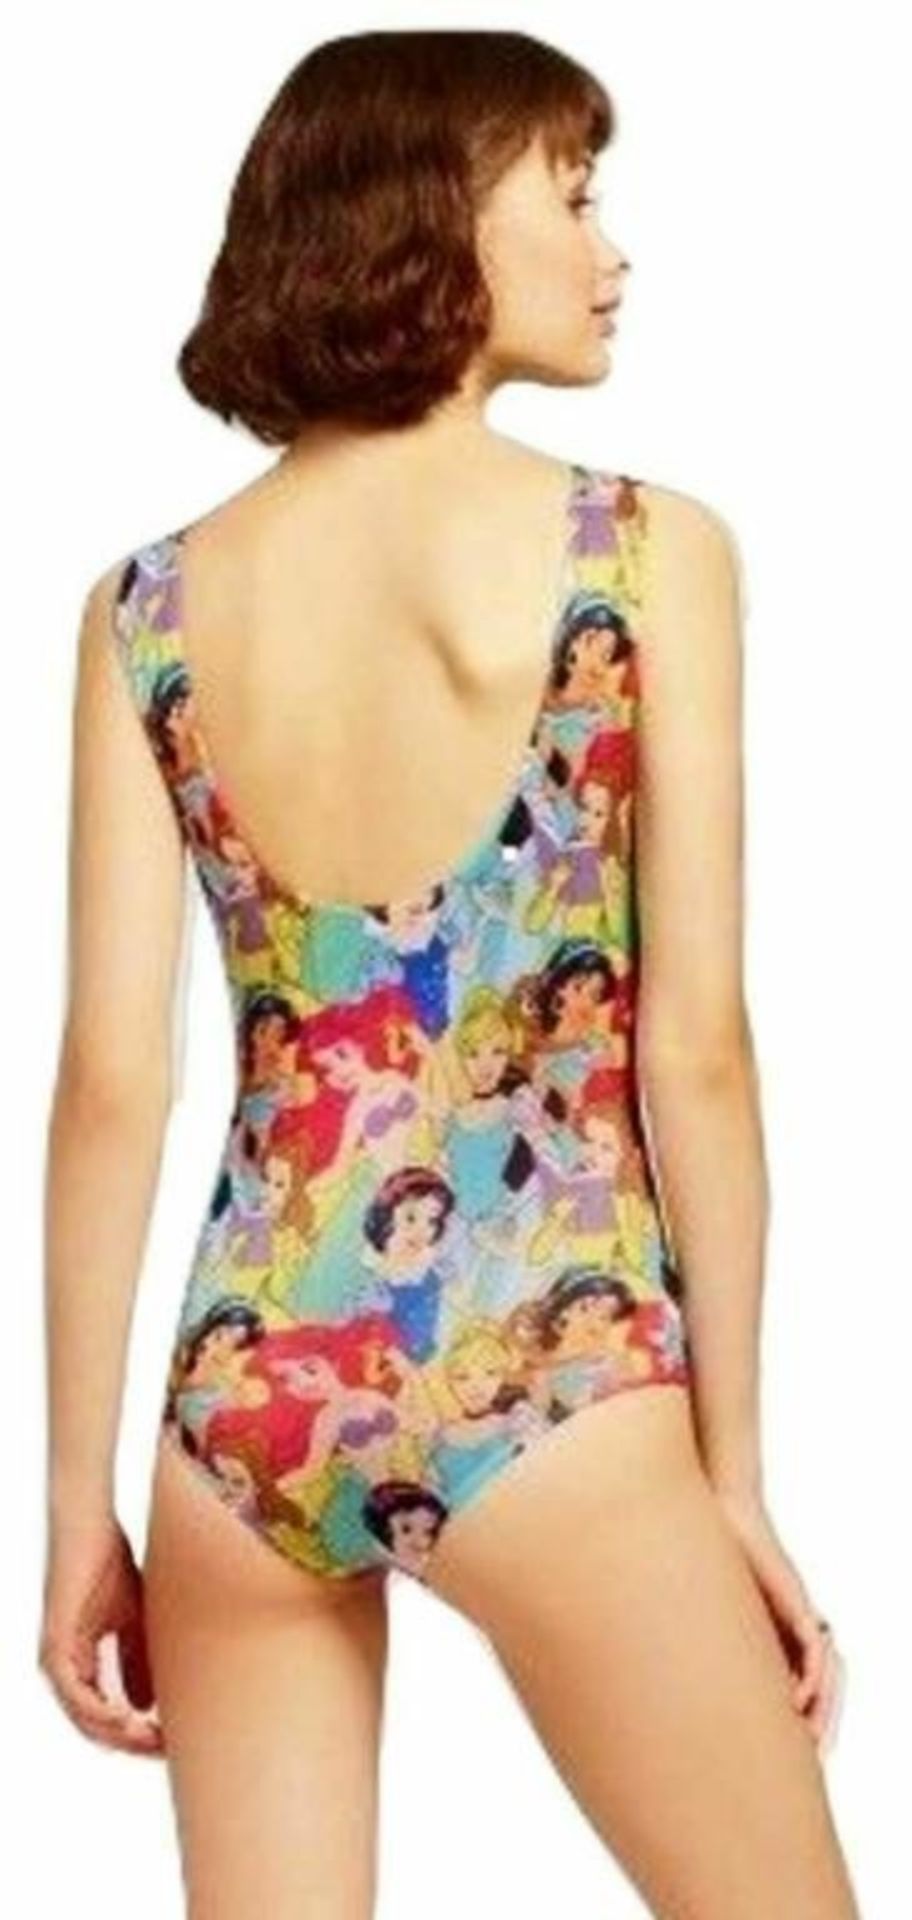 50 DISNEY'S PRINCESS TEEN GIRLS BODYSUIT, VARIOUS SIZES, NEW WITH TAGS ($400++ RETAIL VALUE) STRETCH - Image 6 of 6